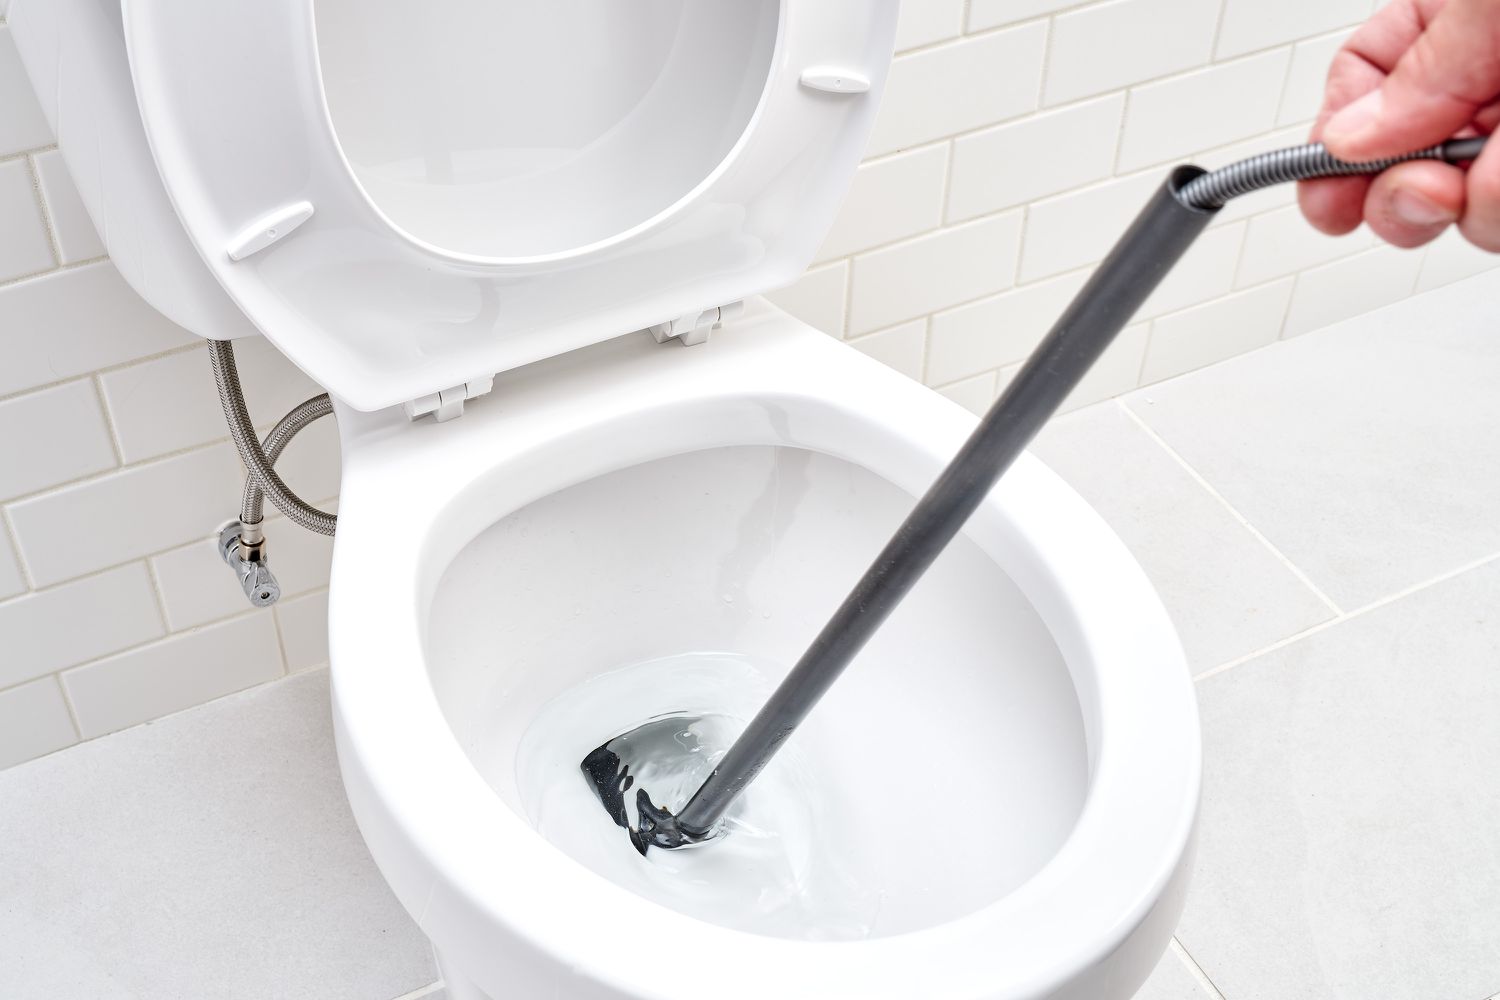 How To Use Plumbing Snake In Toilet